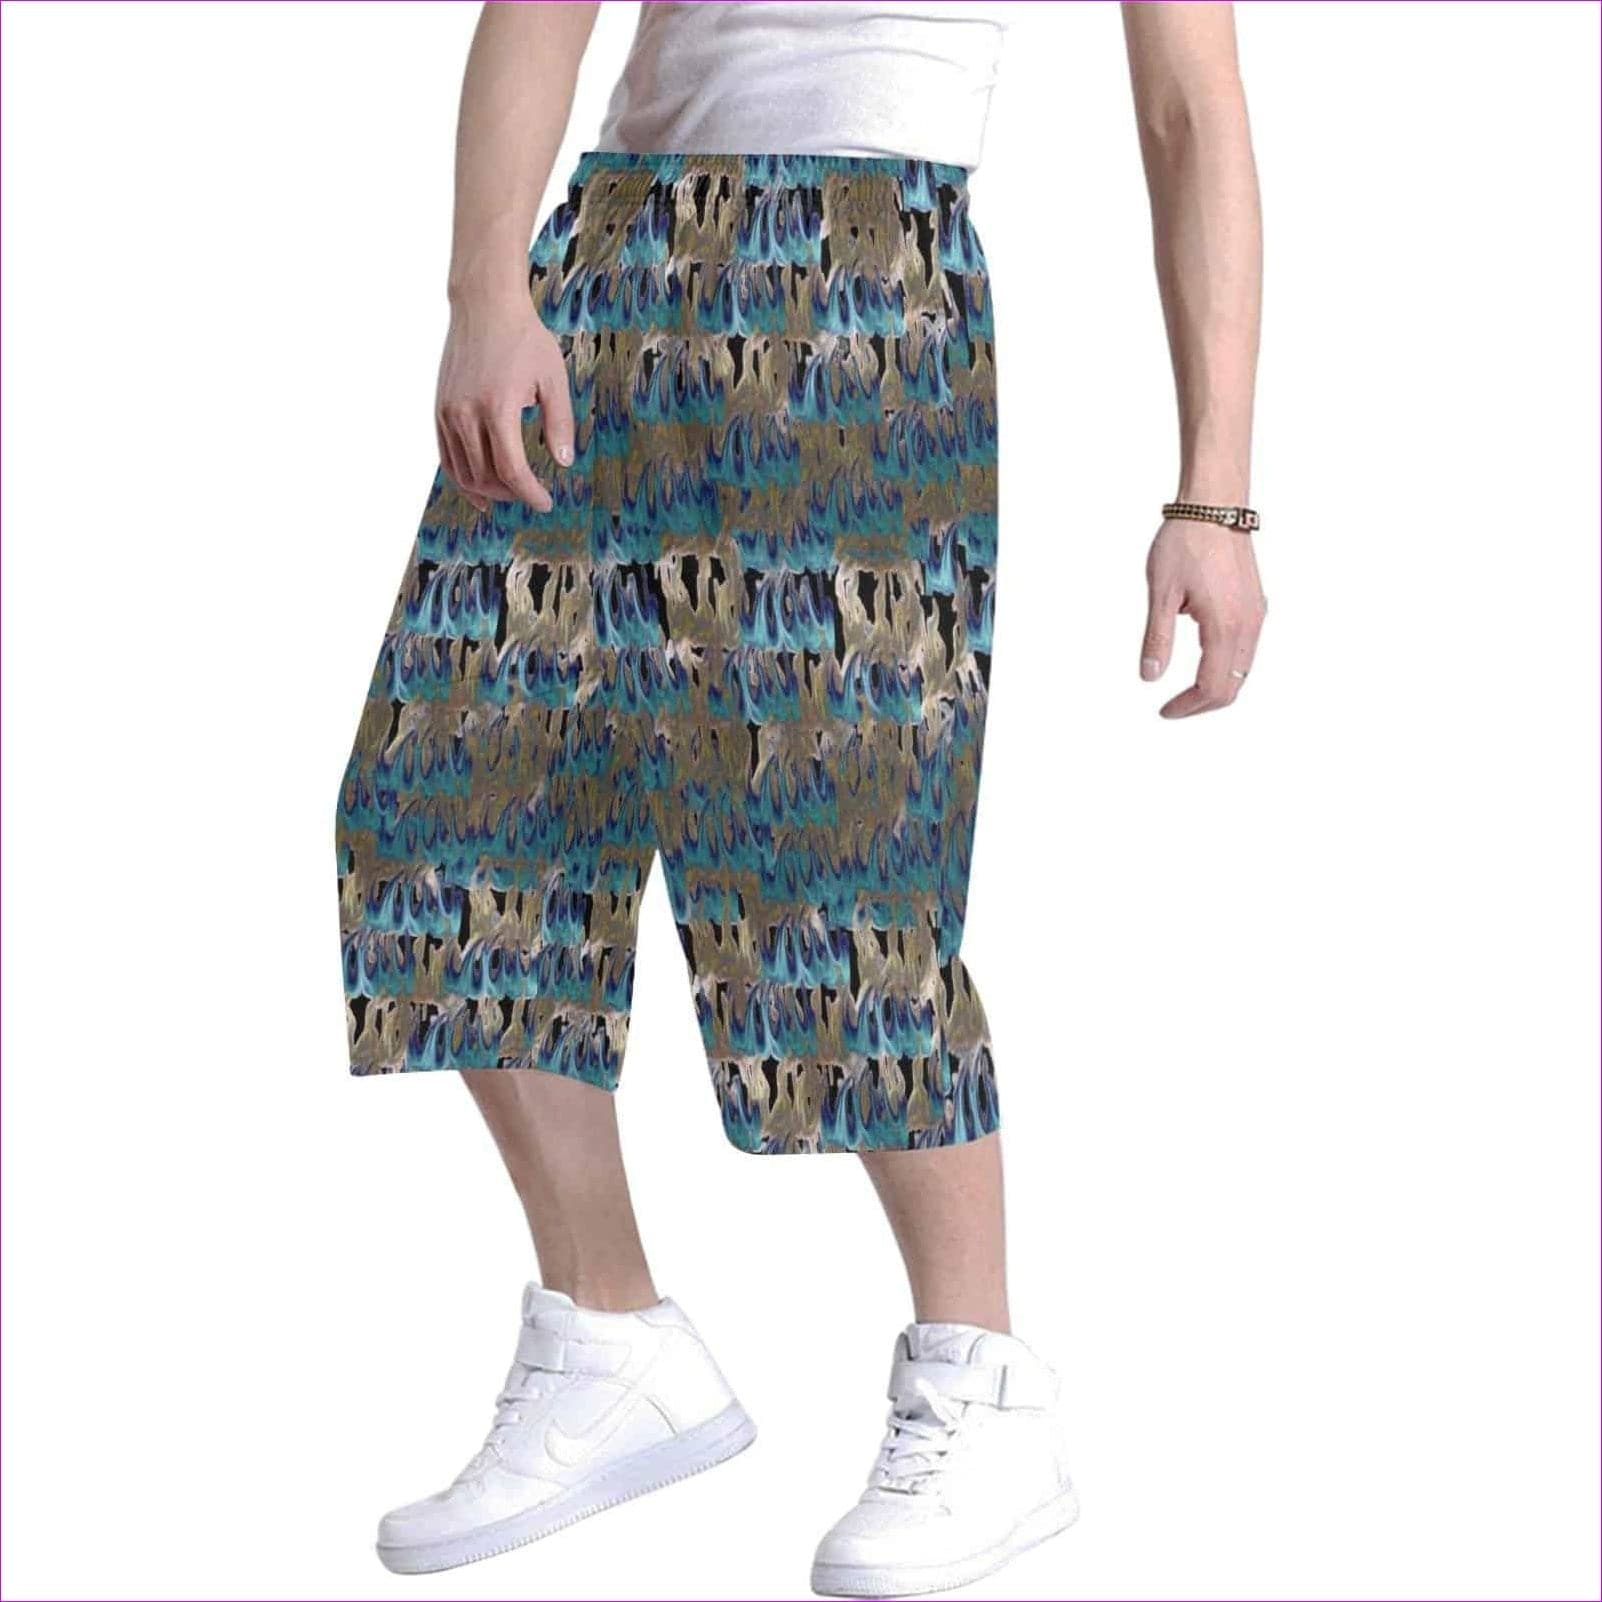 TSWG Flame 2 Men's All Over Print Baggy Shorts (Model L37) - TSWG Flame Baggy Shorts for Men - 2 Styles - mens shorts at TFC&H Co.